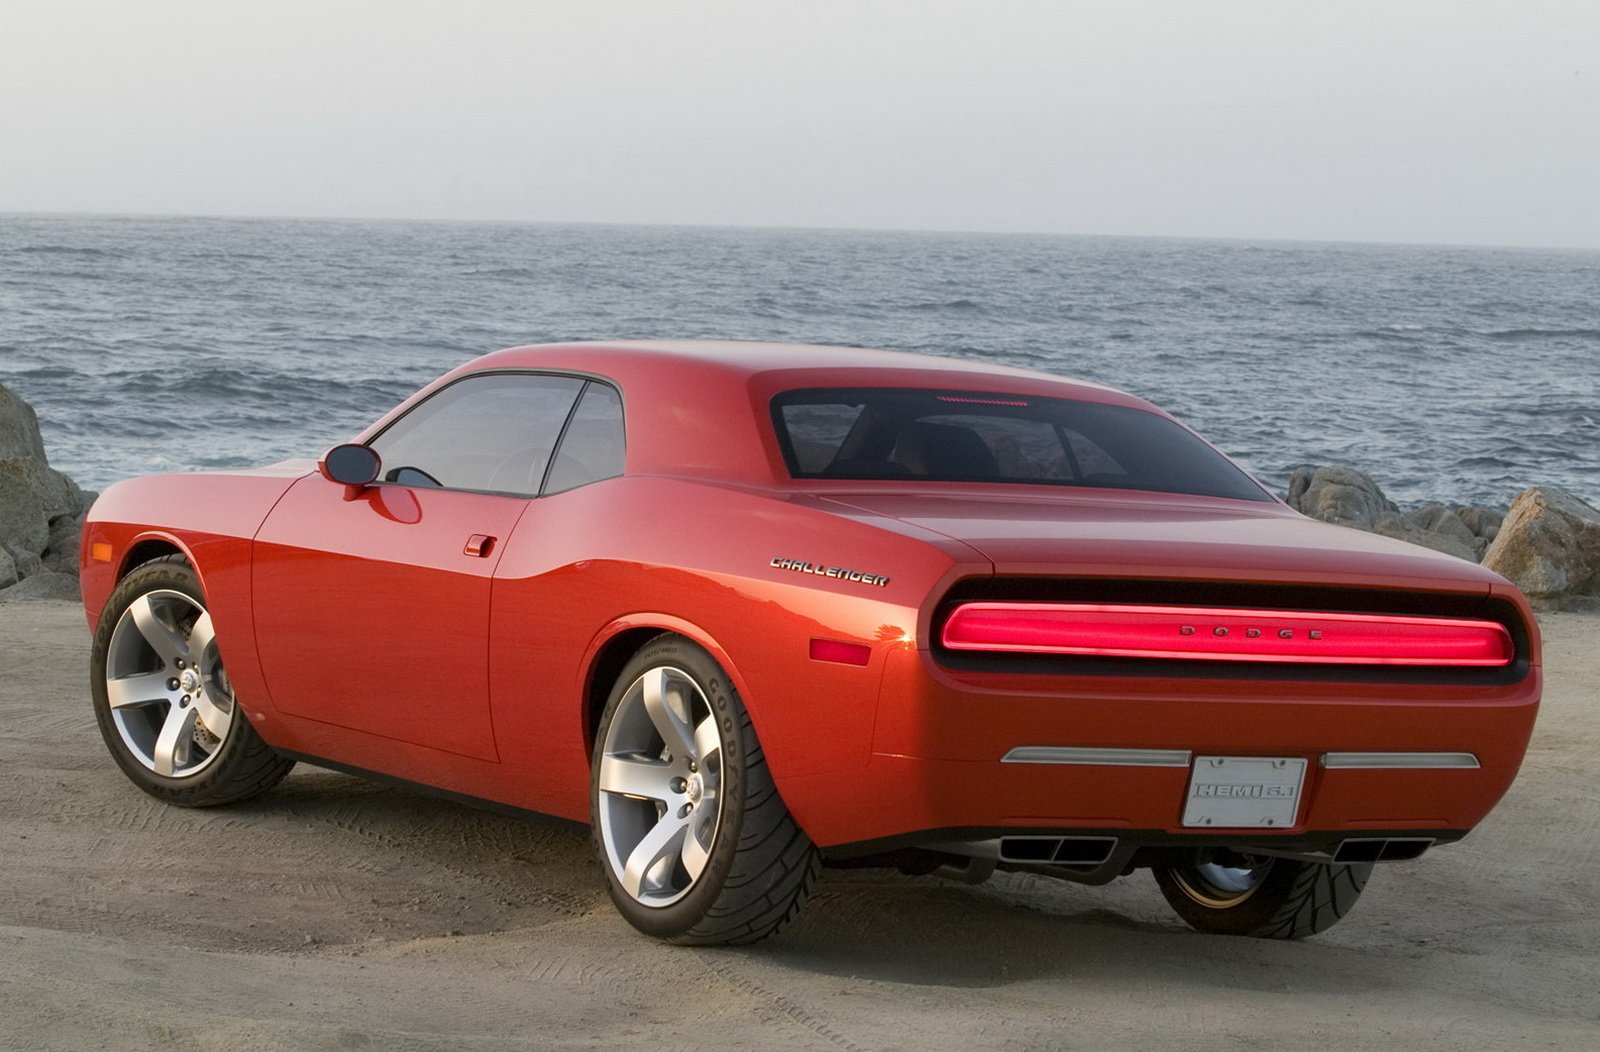 Dodge Challenger Wallpaper and Background Image | 1600x1052